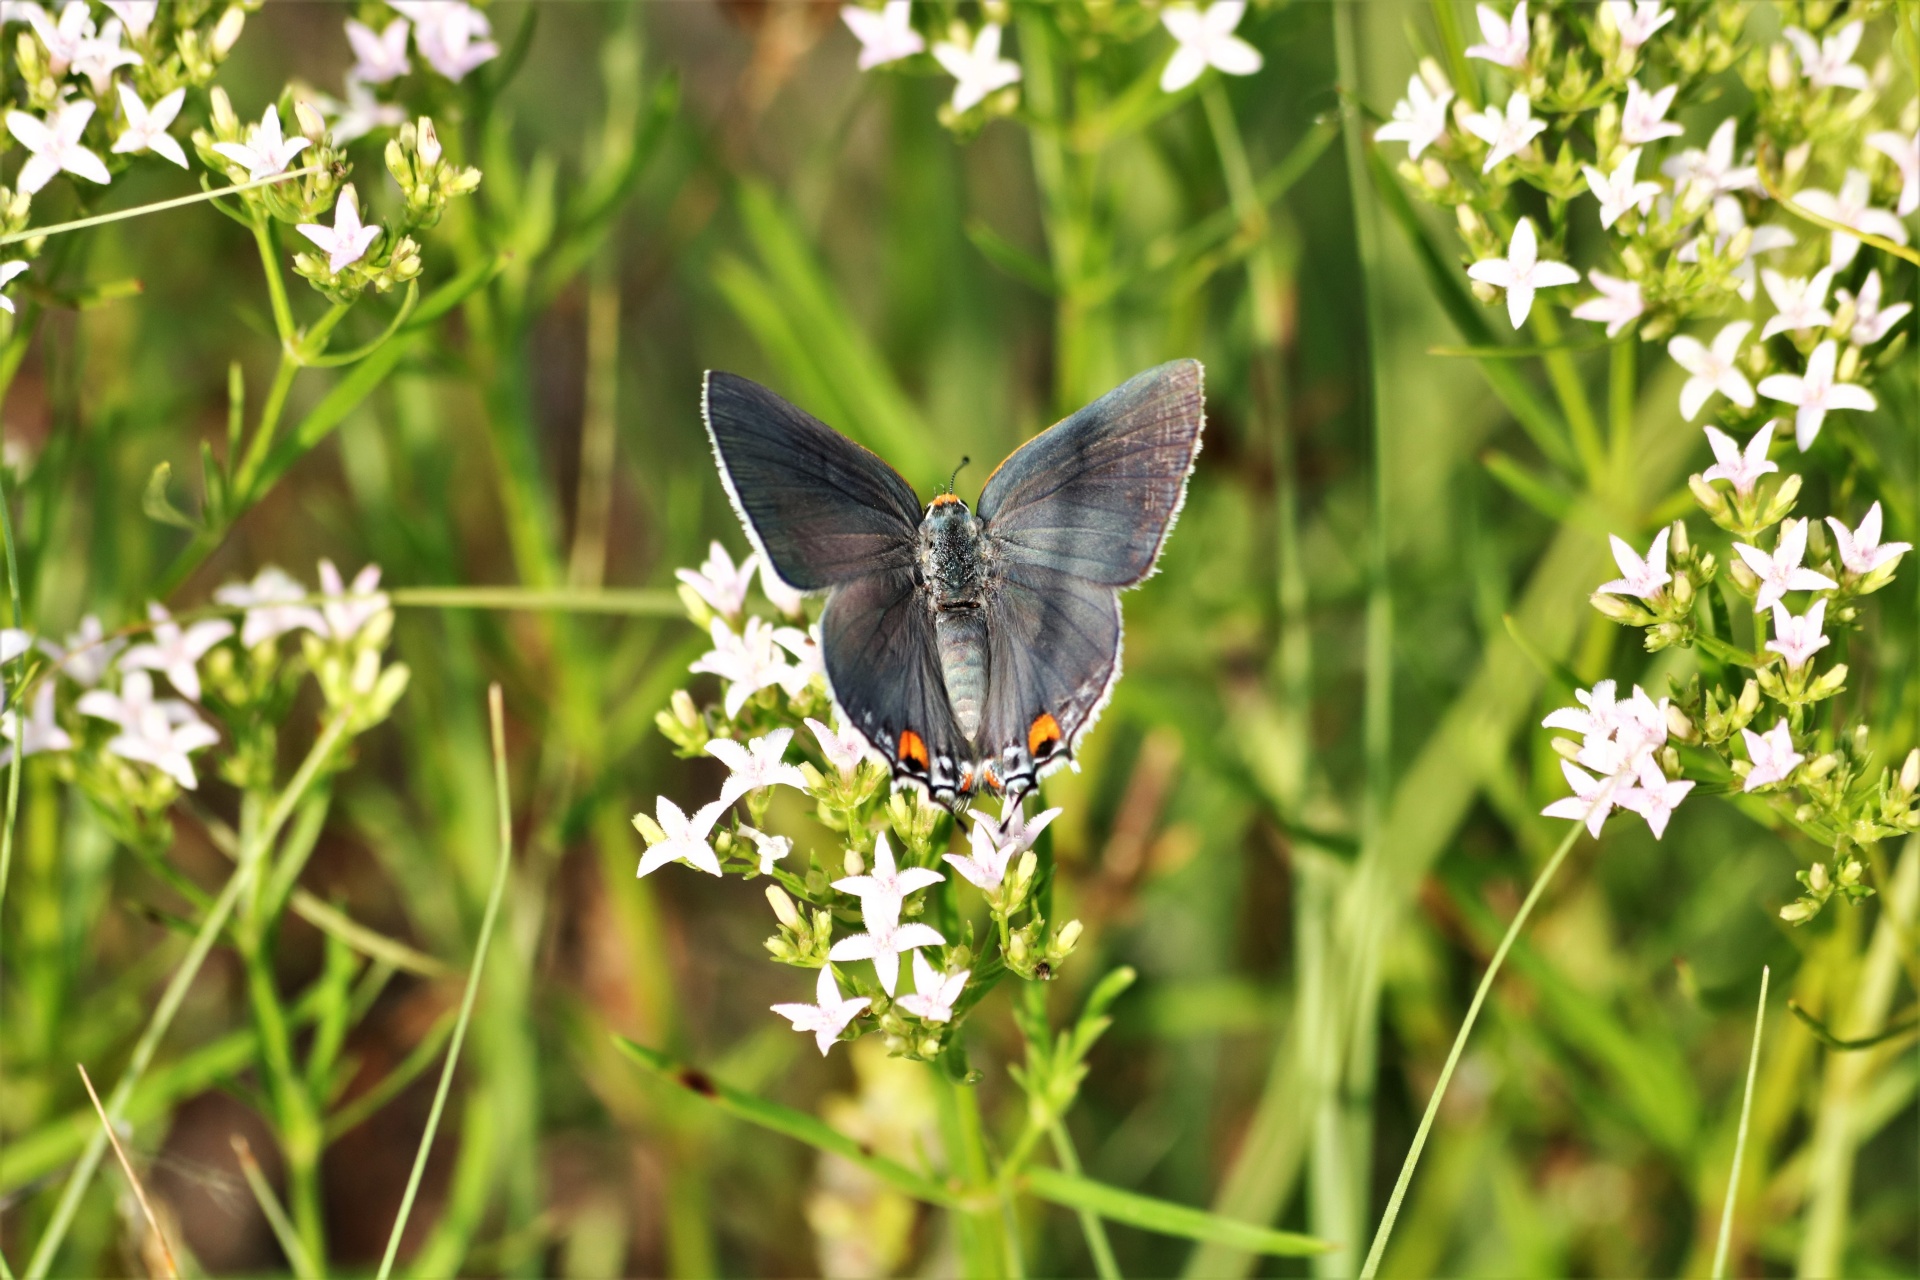 Close-up of a gray hairstreak butterfly with wings spread, on white wildflowers in an Oklahoma country field.